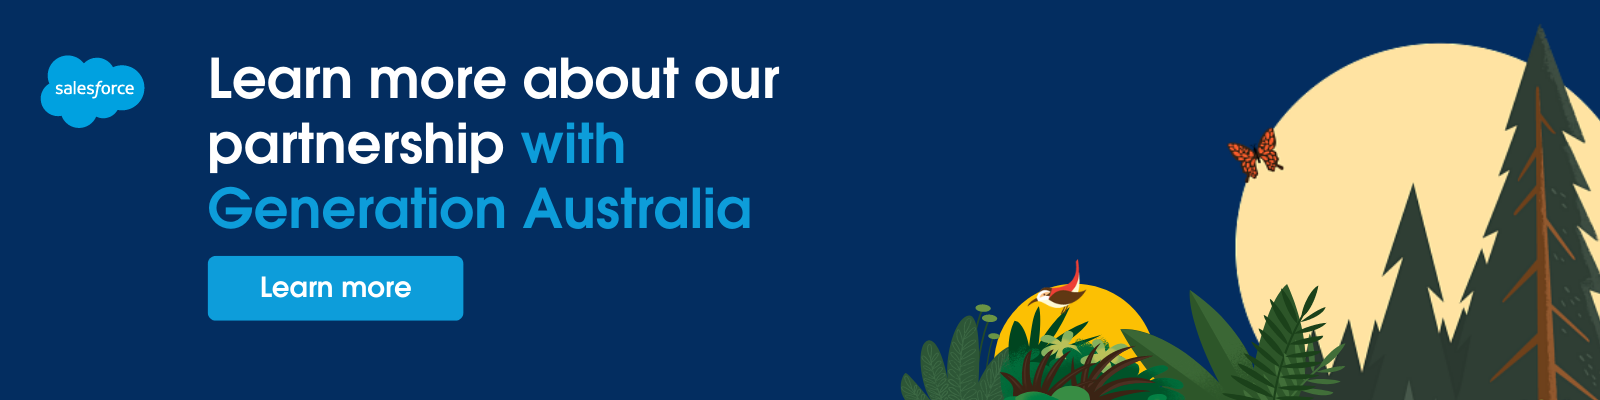 Learn more about our partnership with Generation Australia.